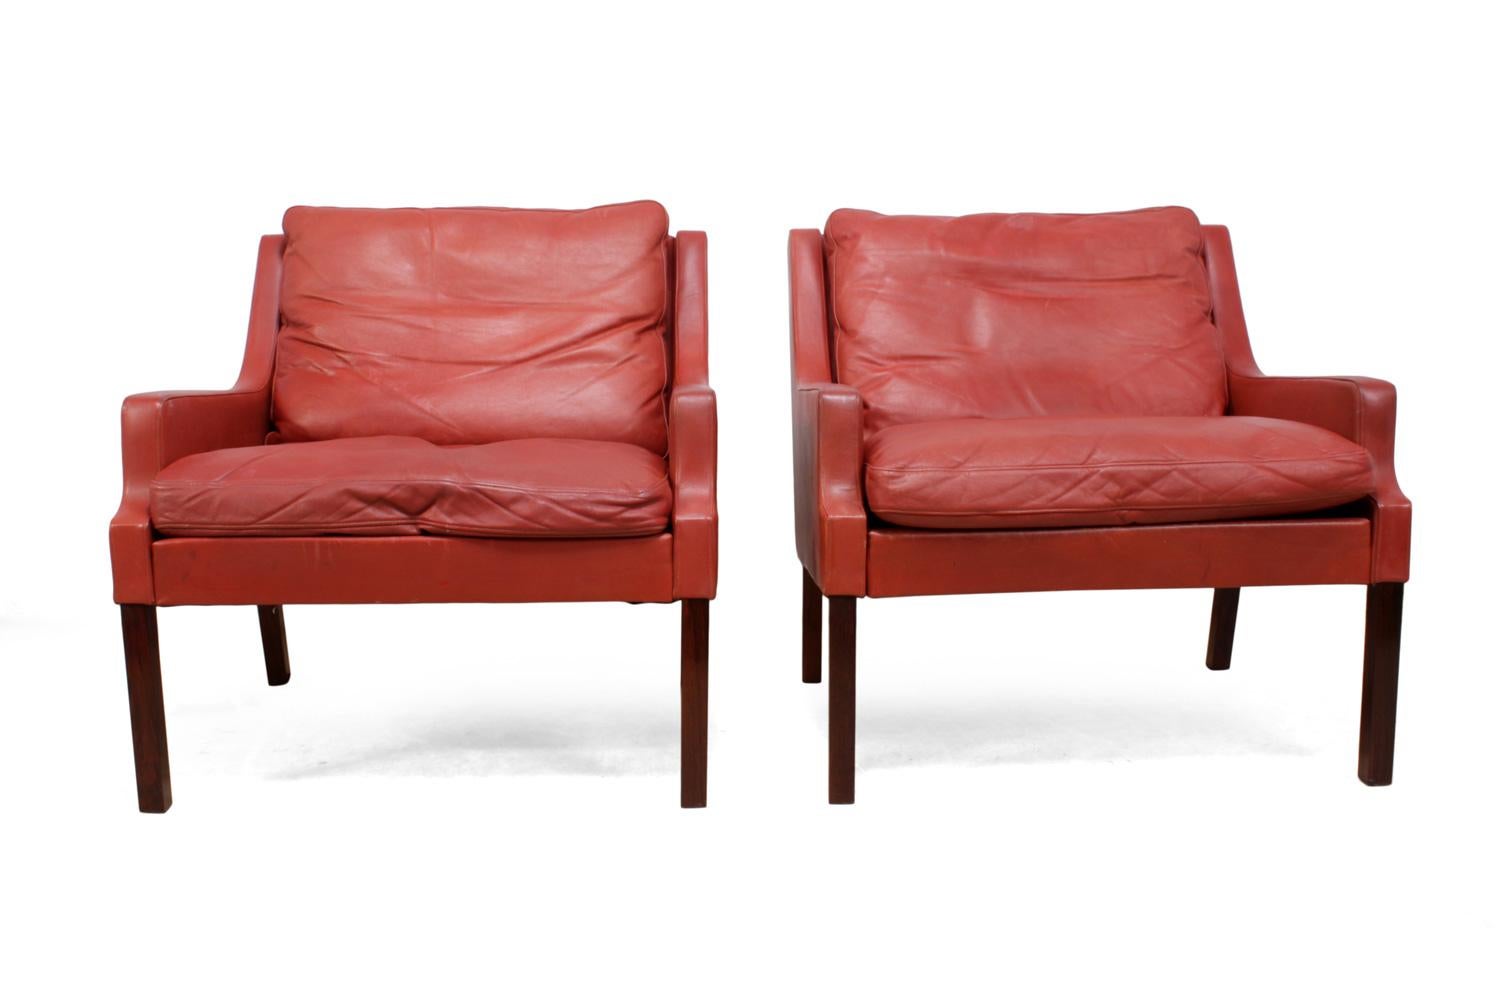 Danish Lounge Chairs in Red Leather with Stools In Excellent Condition For Sale In Paddock Wood, Kent